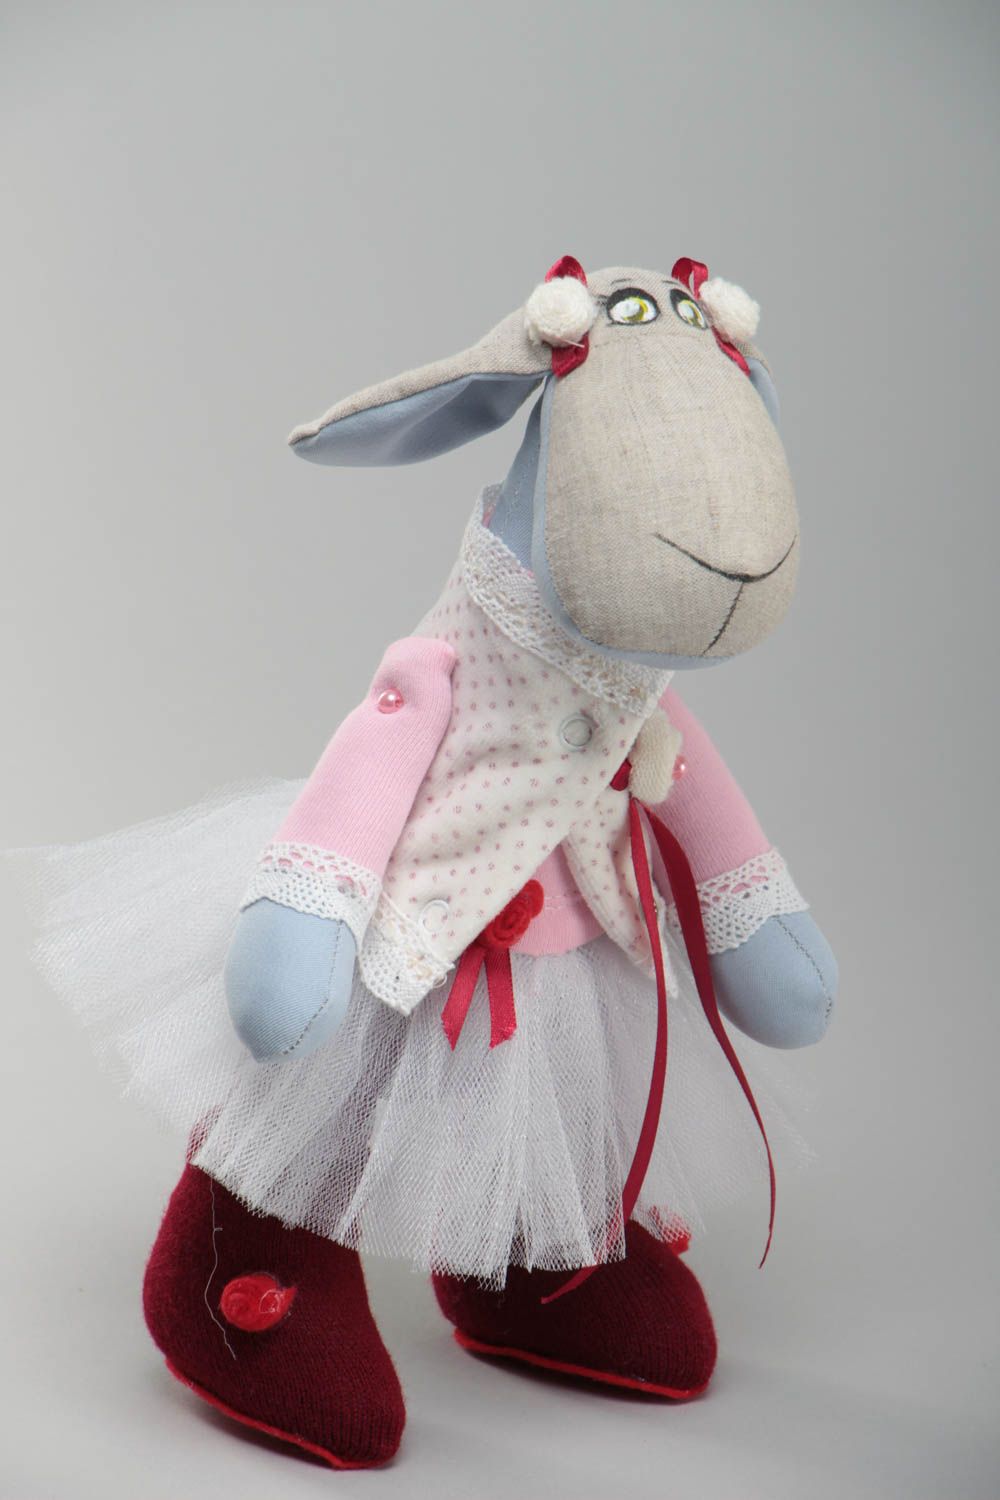 Handmade soft toy sewn of fabrics painted with acrylics cute lamb in tutu skirt photo 2